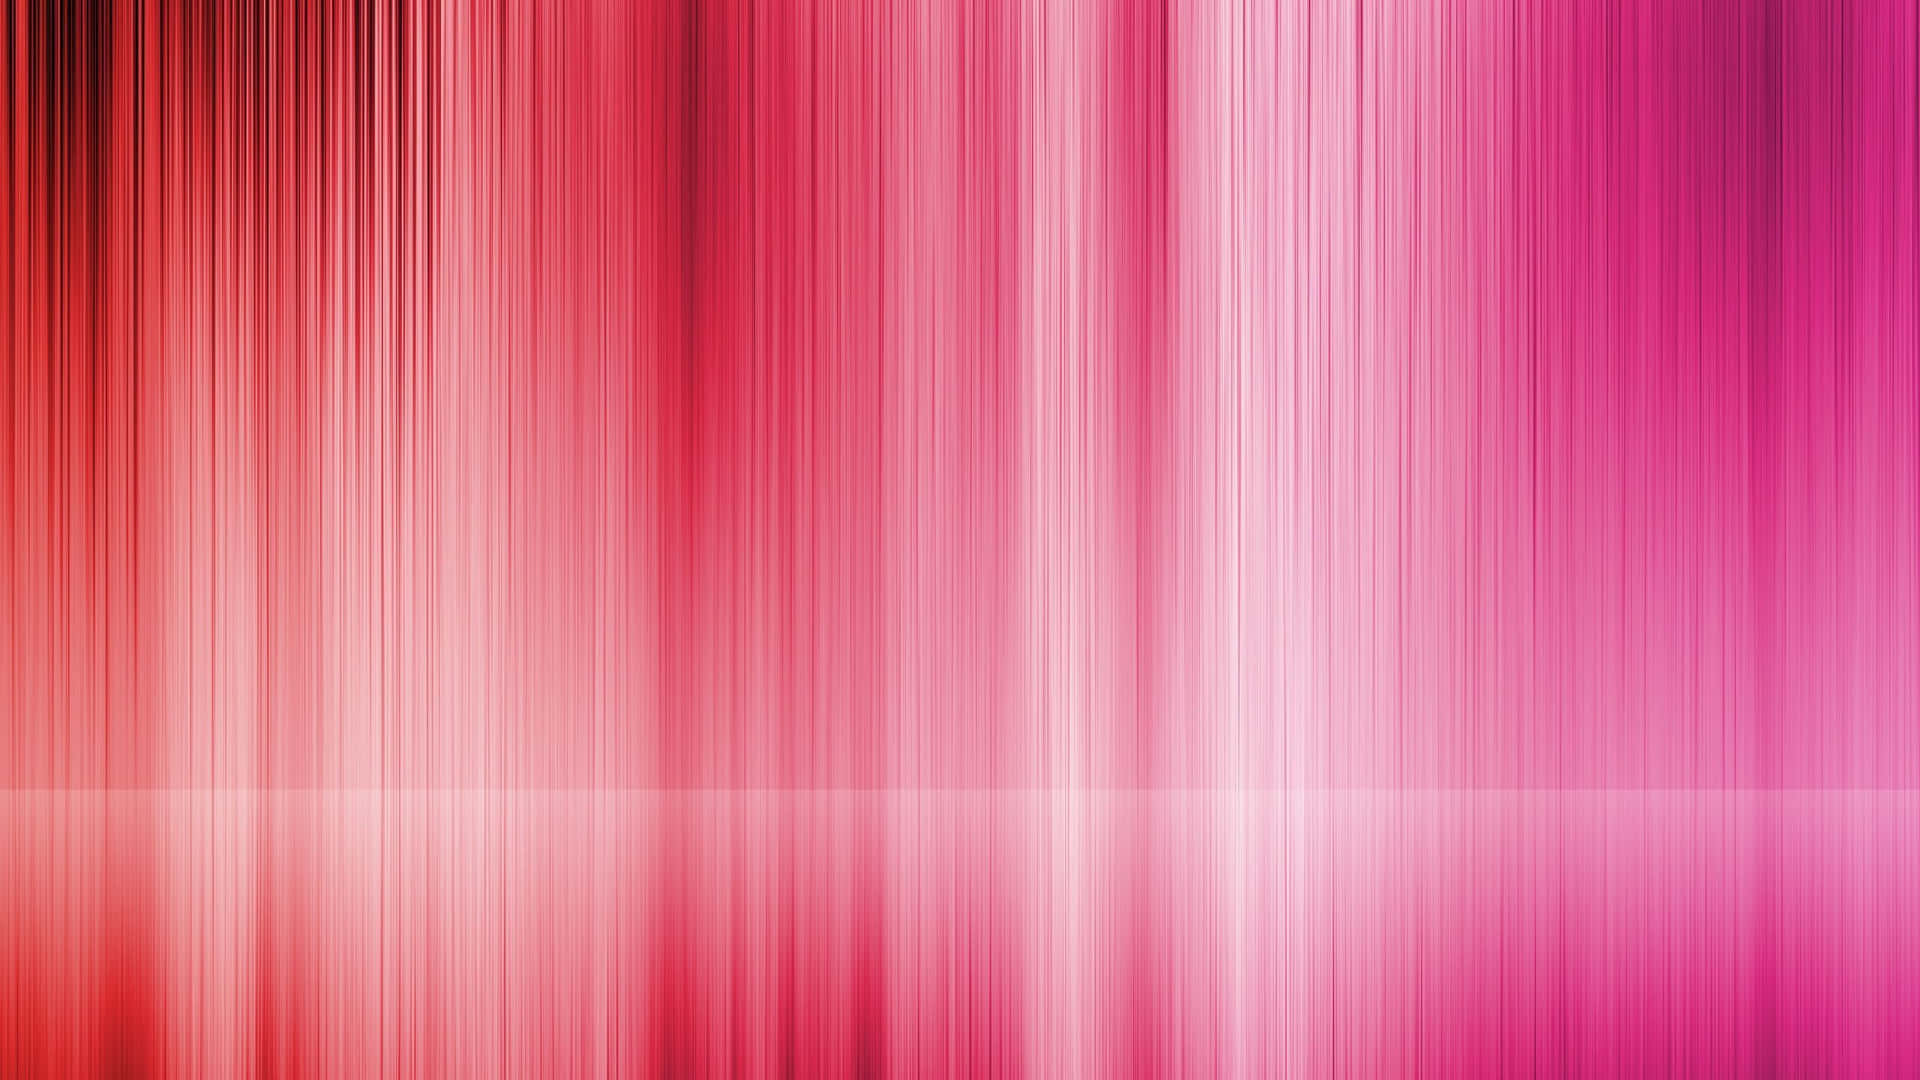 A vibrant abstract of white and pink